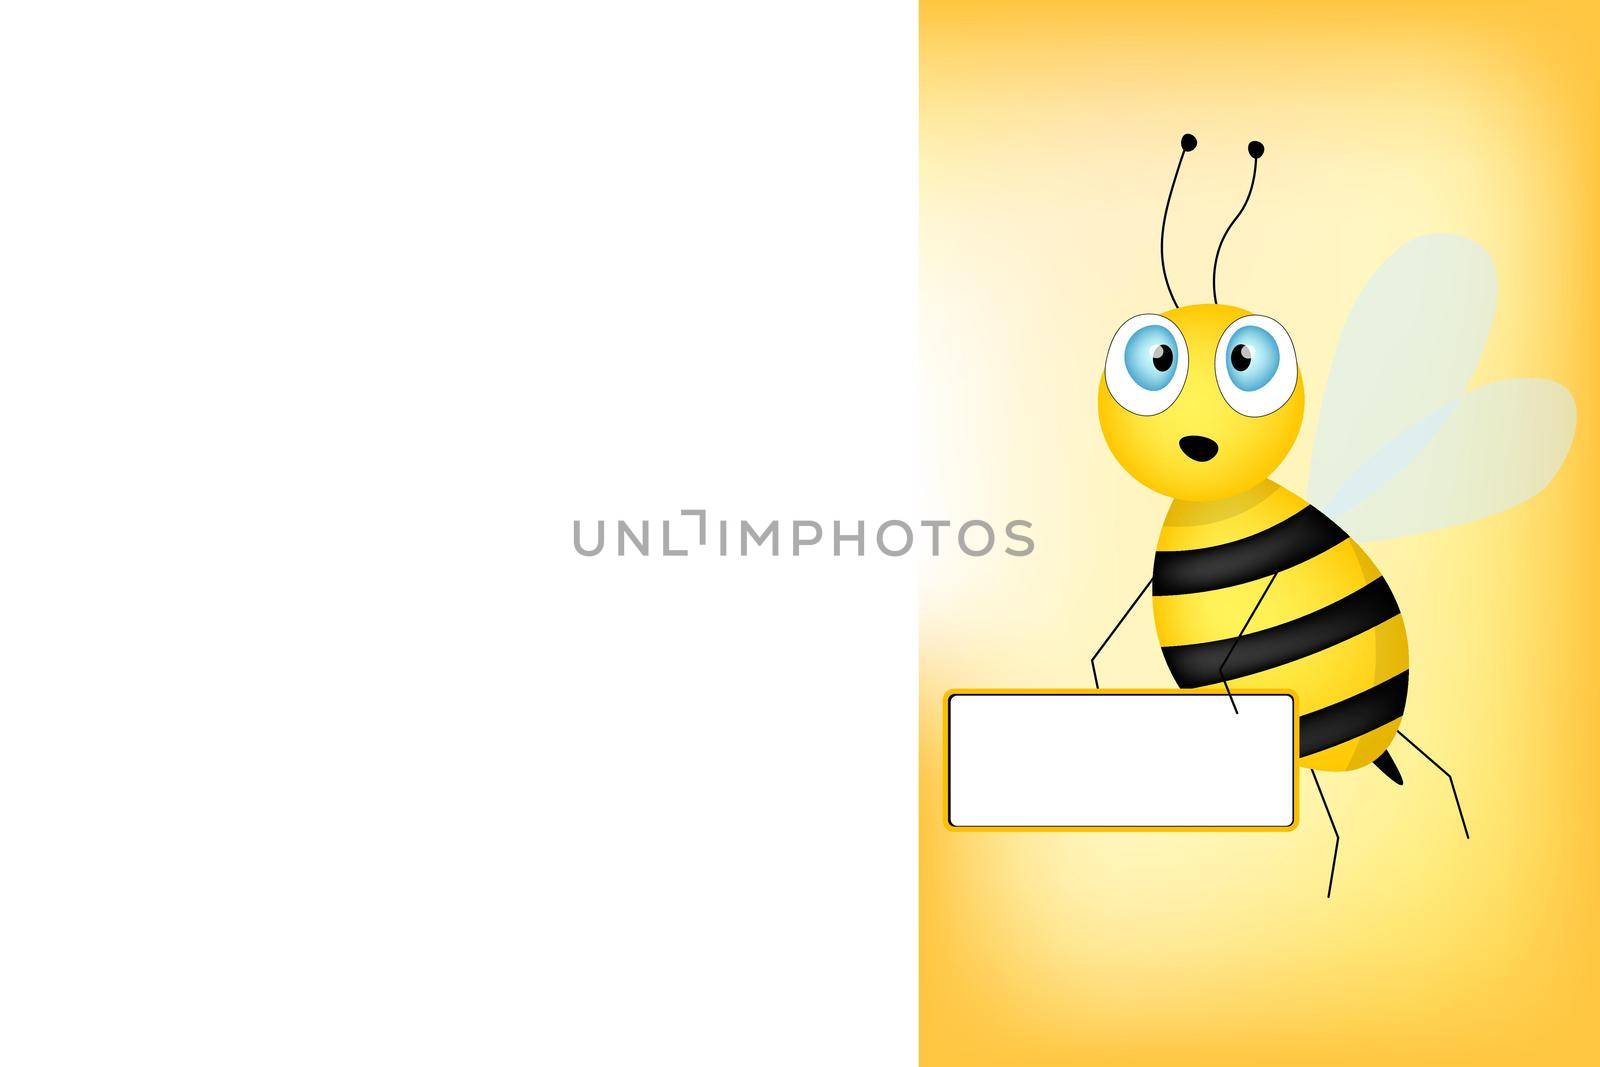 Cartoon cute bee mascot. Merry bee with an empty table. Small wasp. Vector character. Insect icon. Holiday template design for invitation, cards, wallpaper, school, kindergarten. Copy space